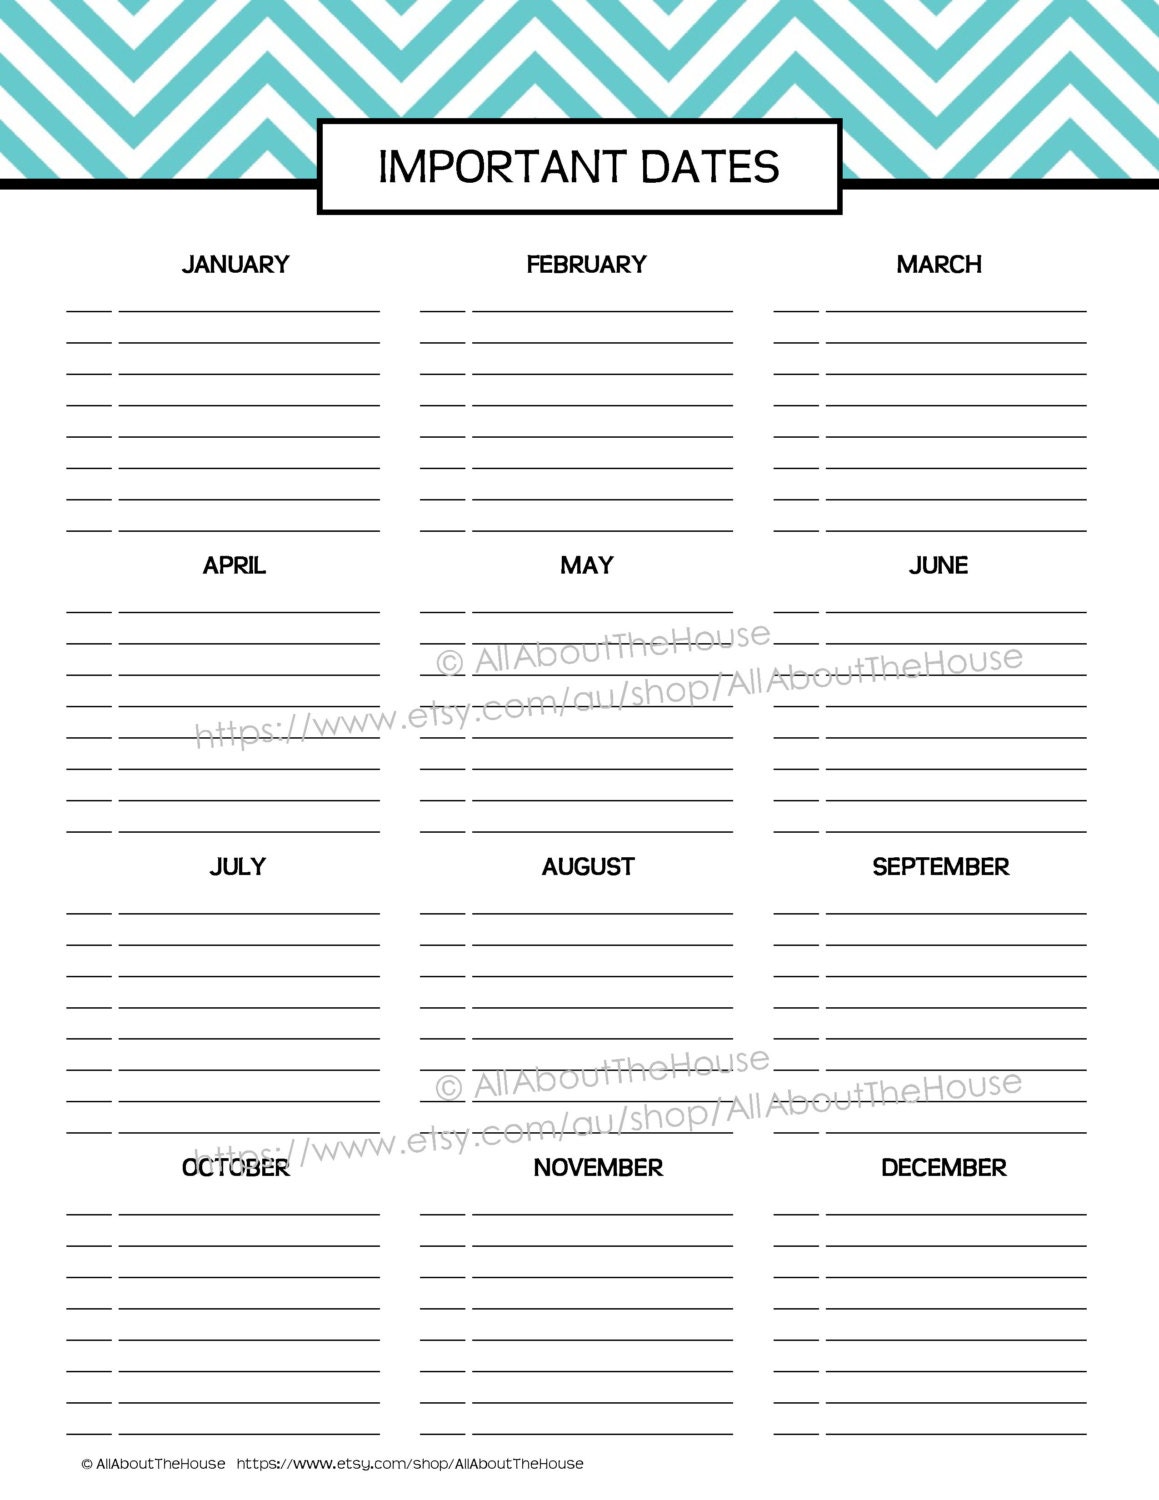 Important Dates Printable Special Planner 2014 2015 day